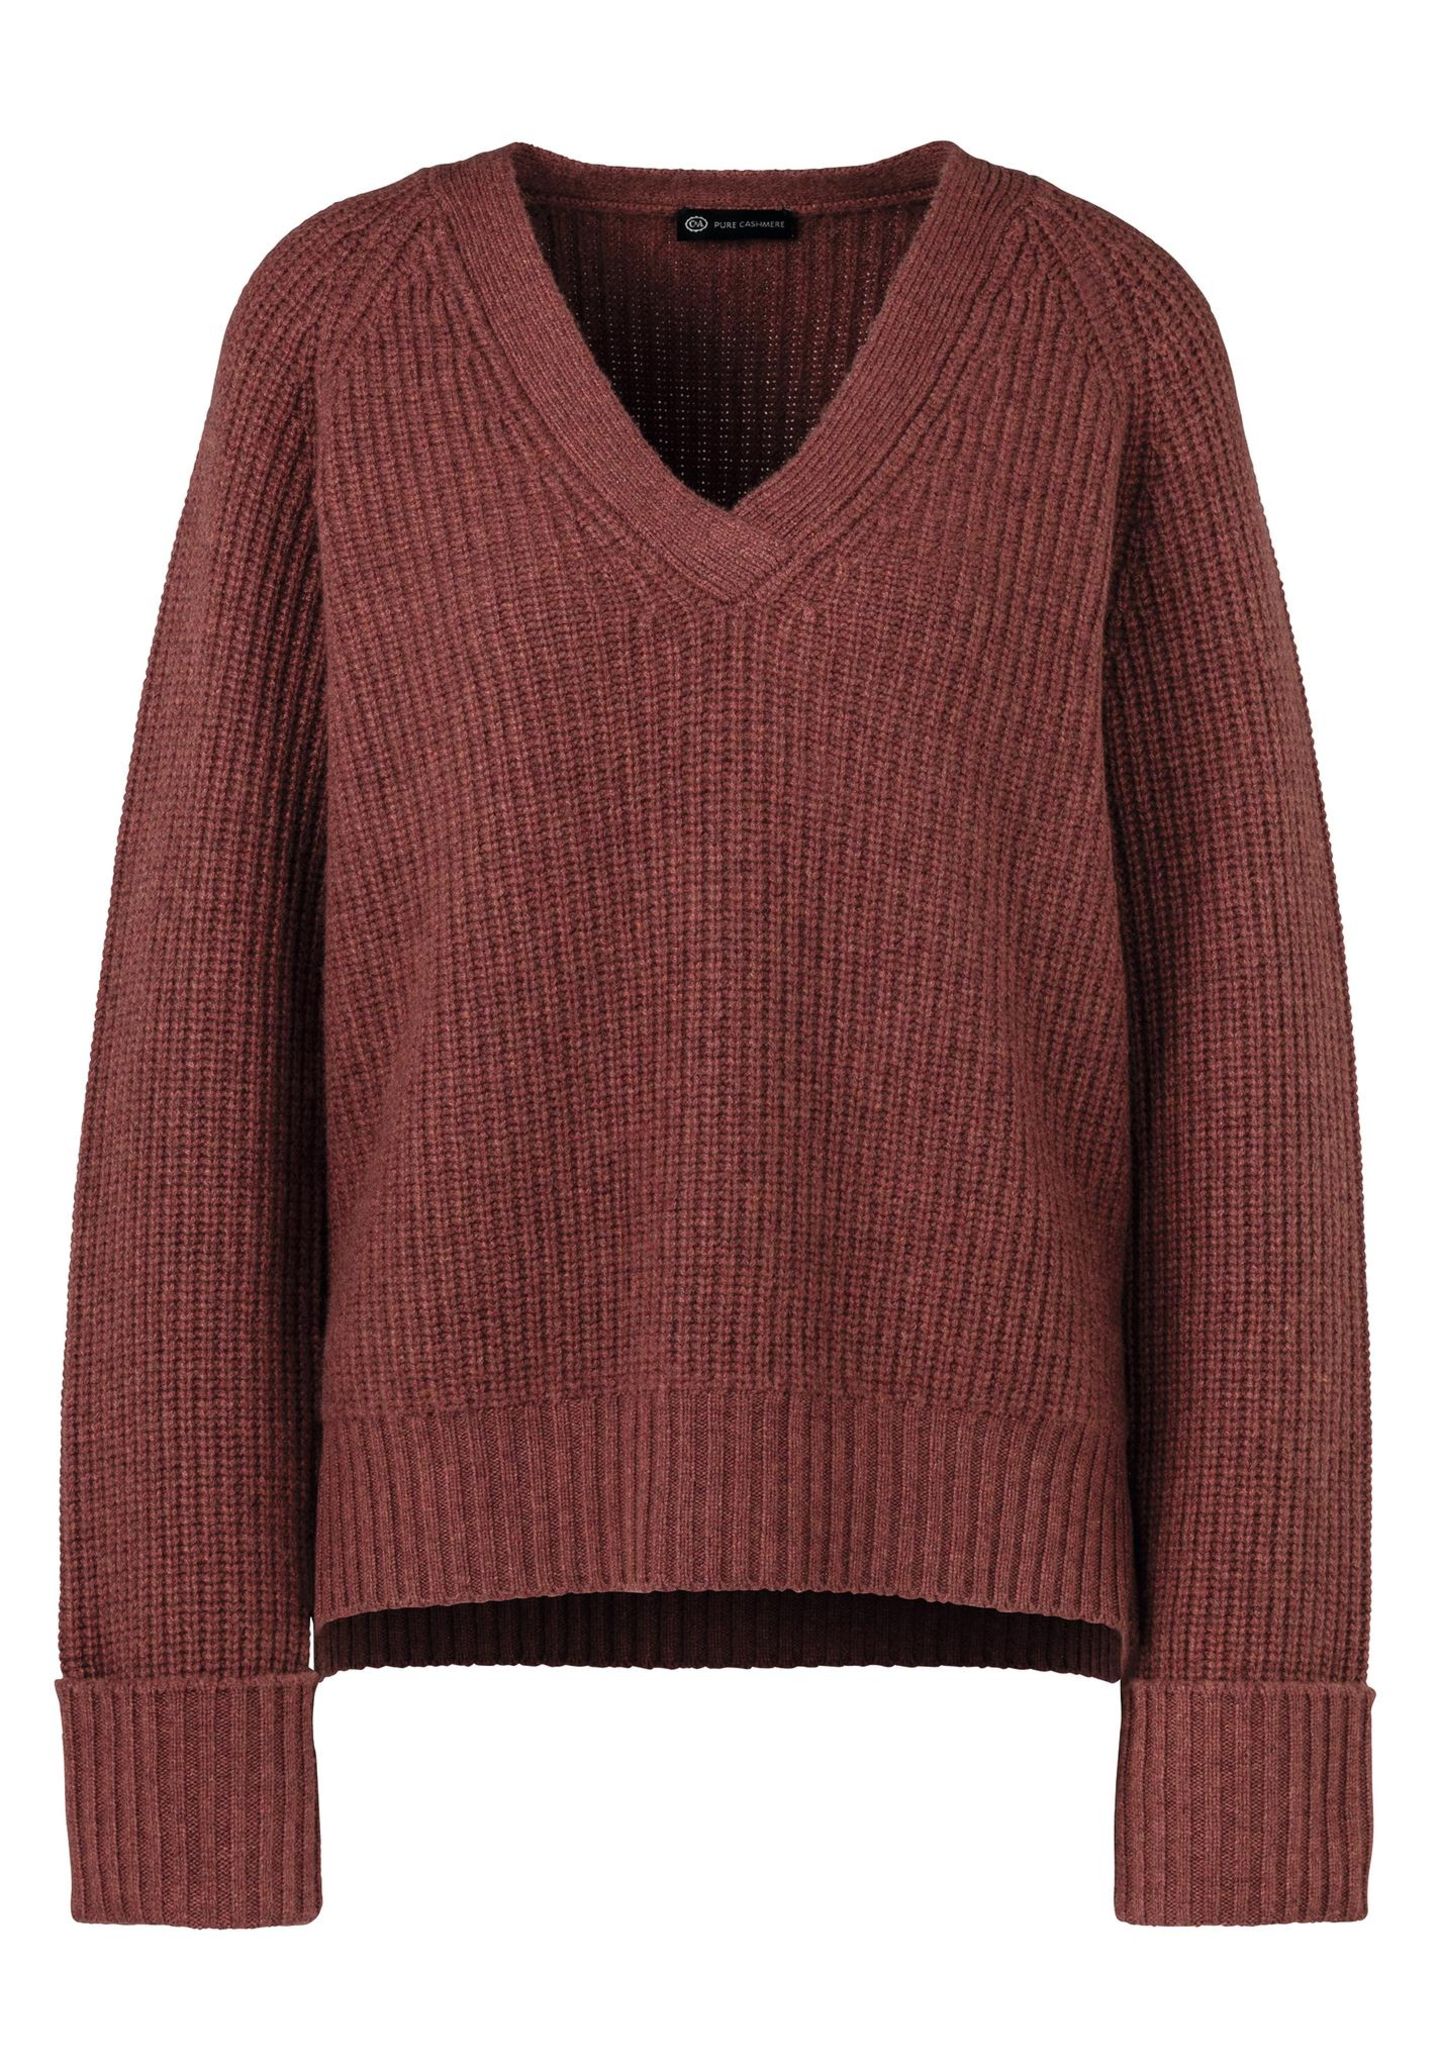 1 Style, 2 Looks: Weinroter Cashmere Pullover